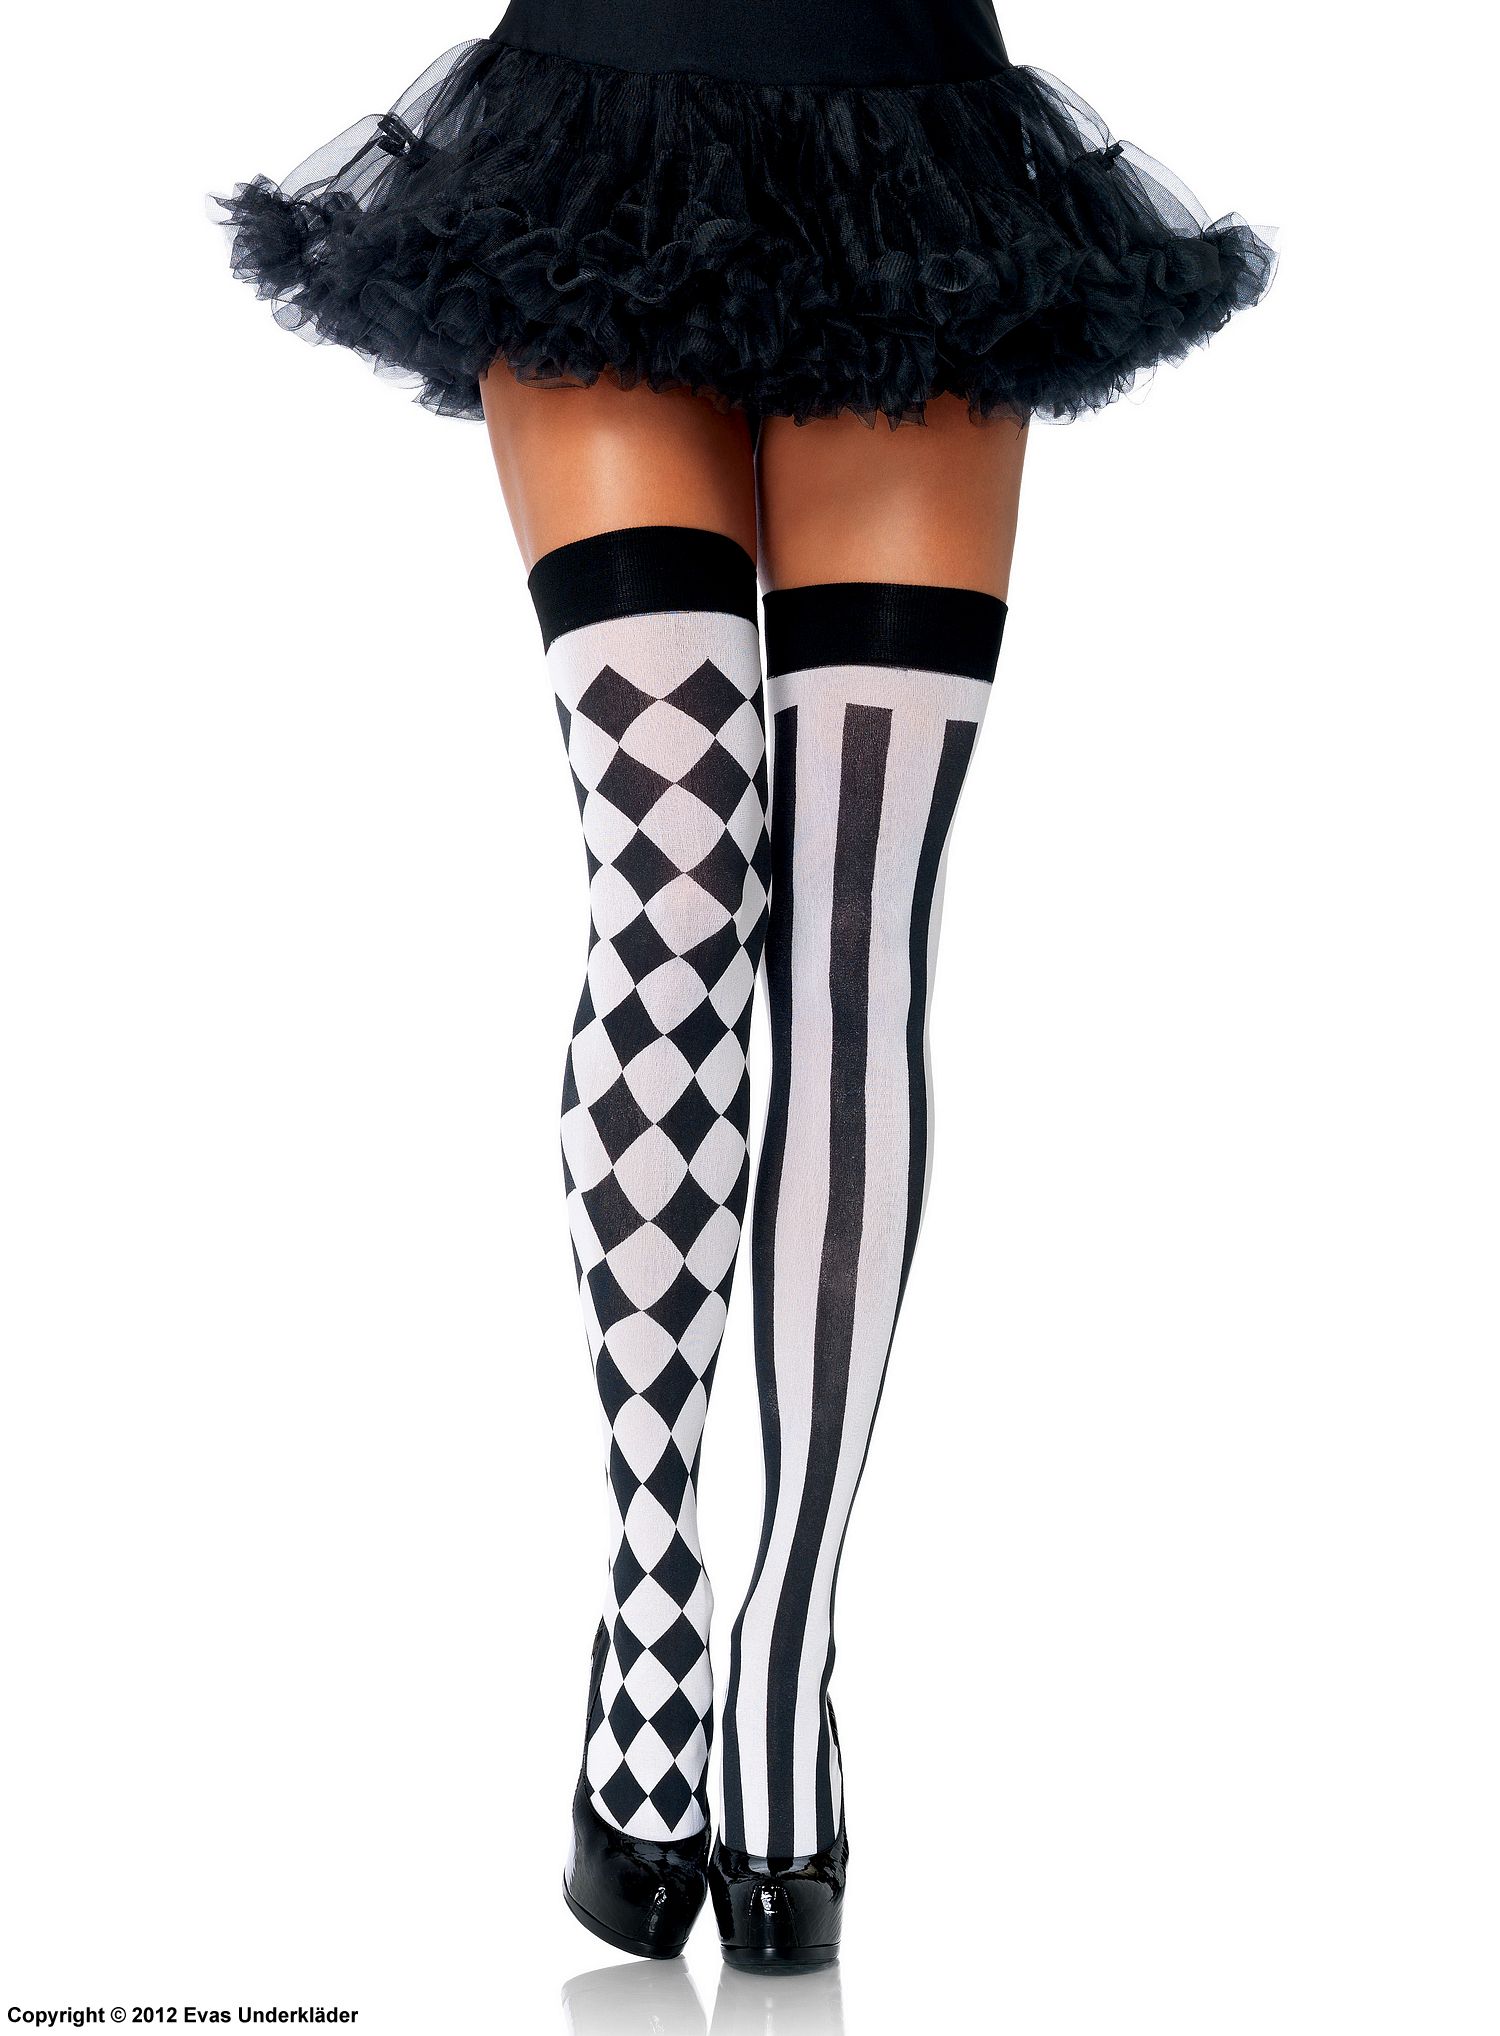 Thigh high stockings, harlequin with stripes and diamonds